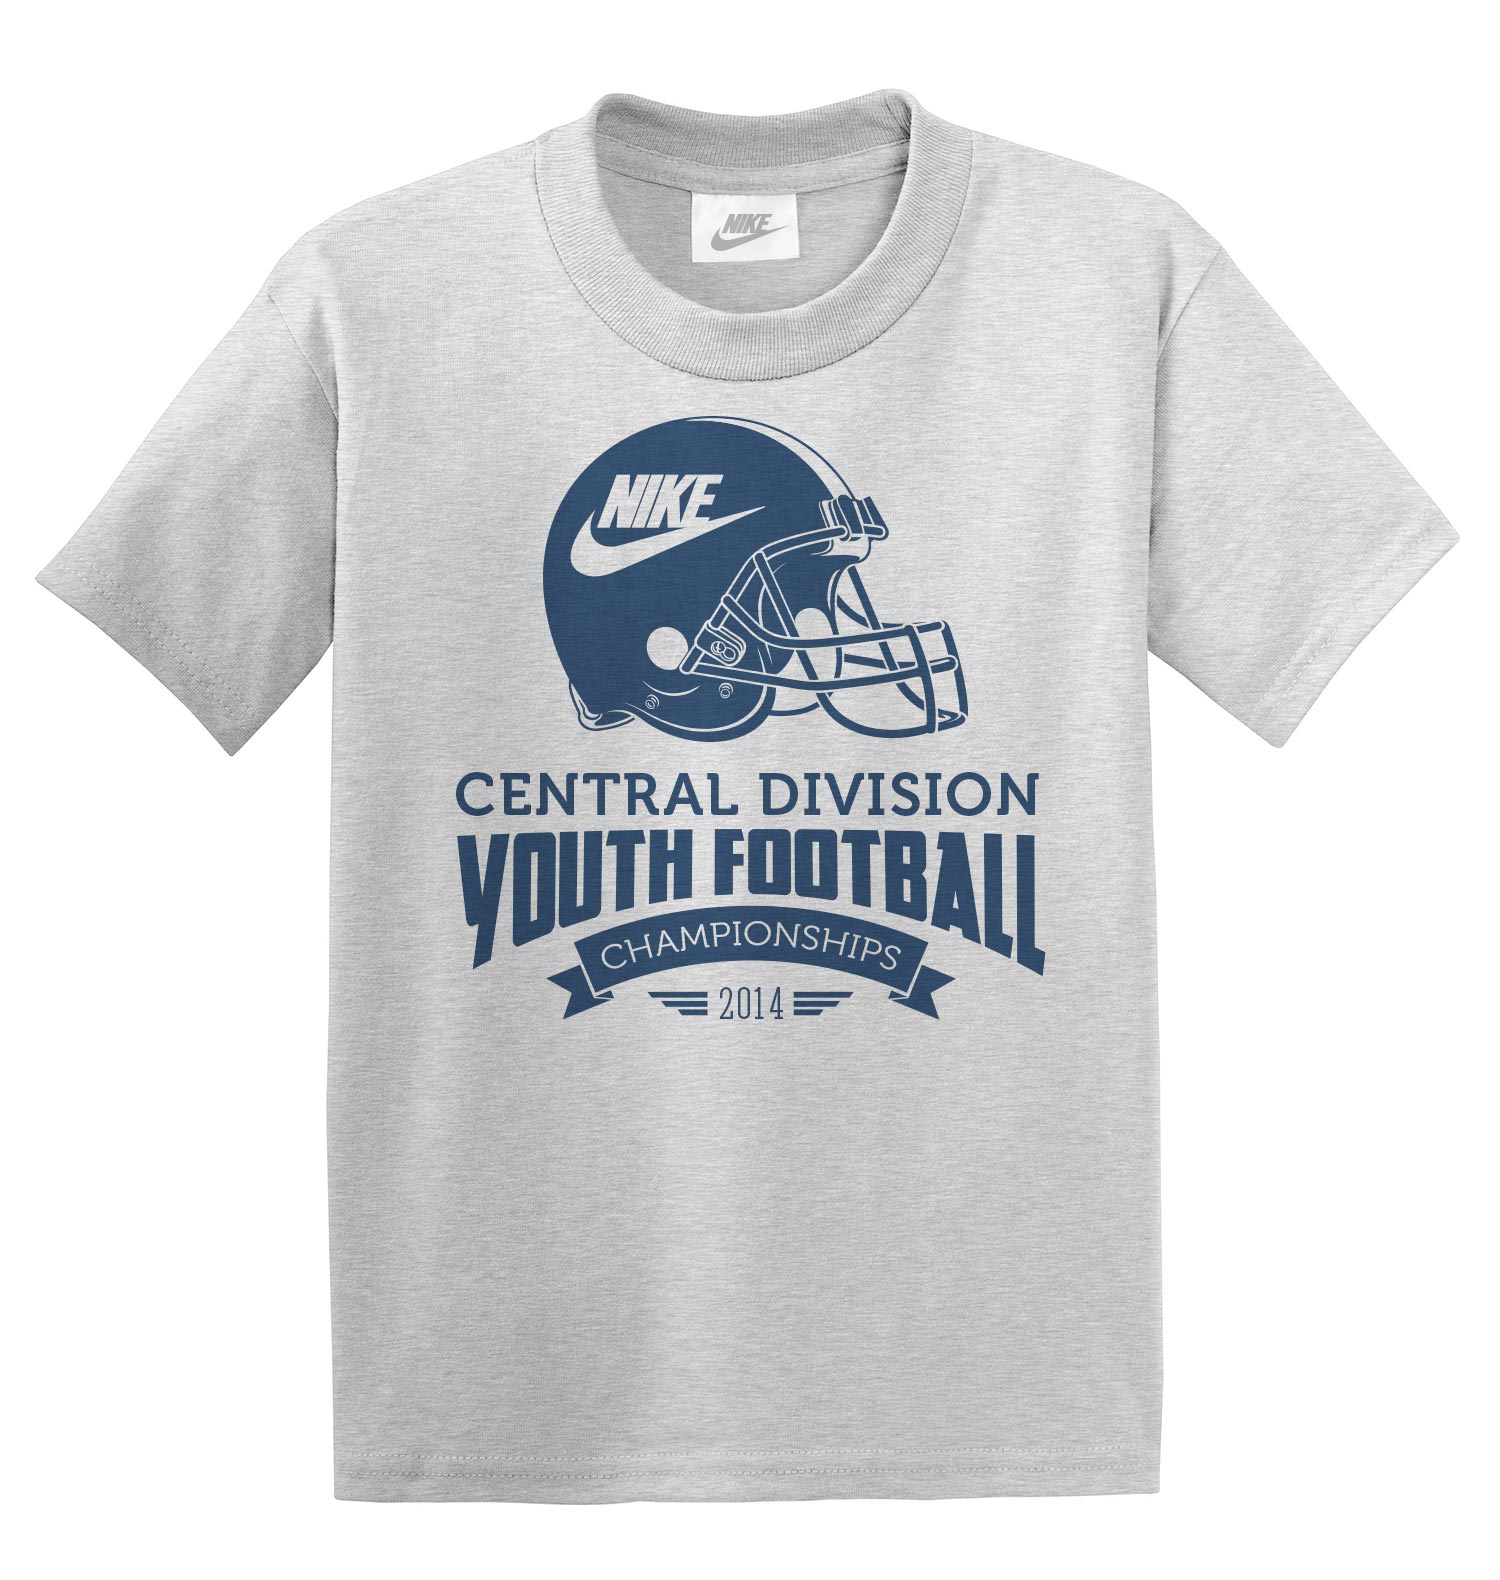 T-shirt – Central Division Youth Football Championships 2014